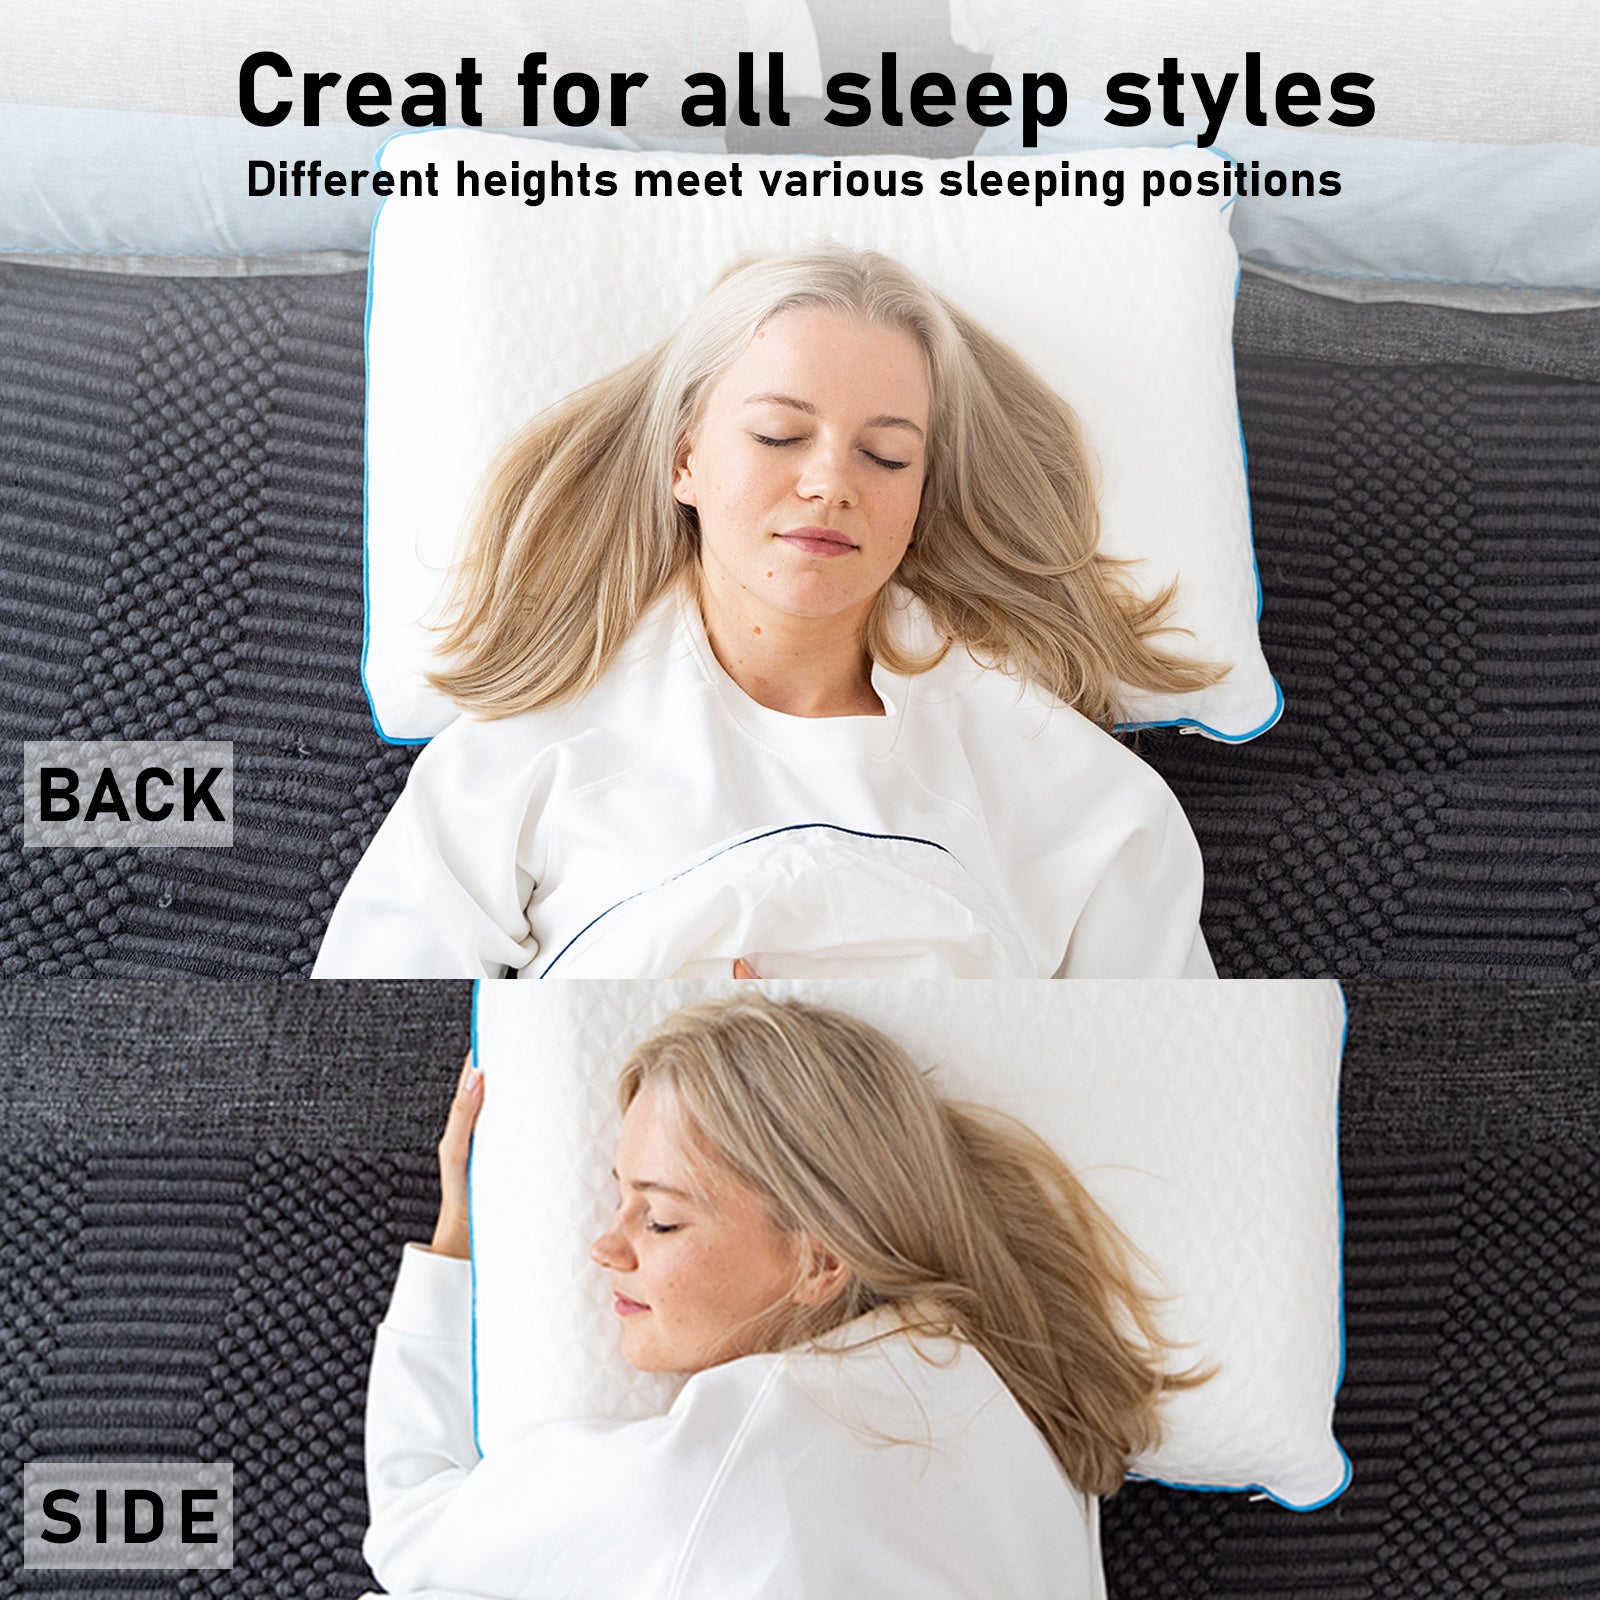 Akarise Memory Foam Pillow for Sleeping- Breathable, Adjustable, Supportive Bed Pillow